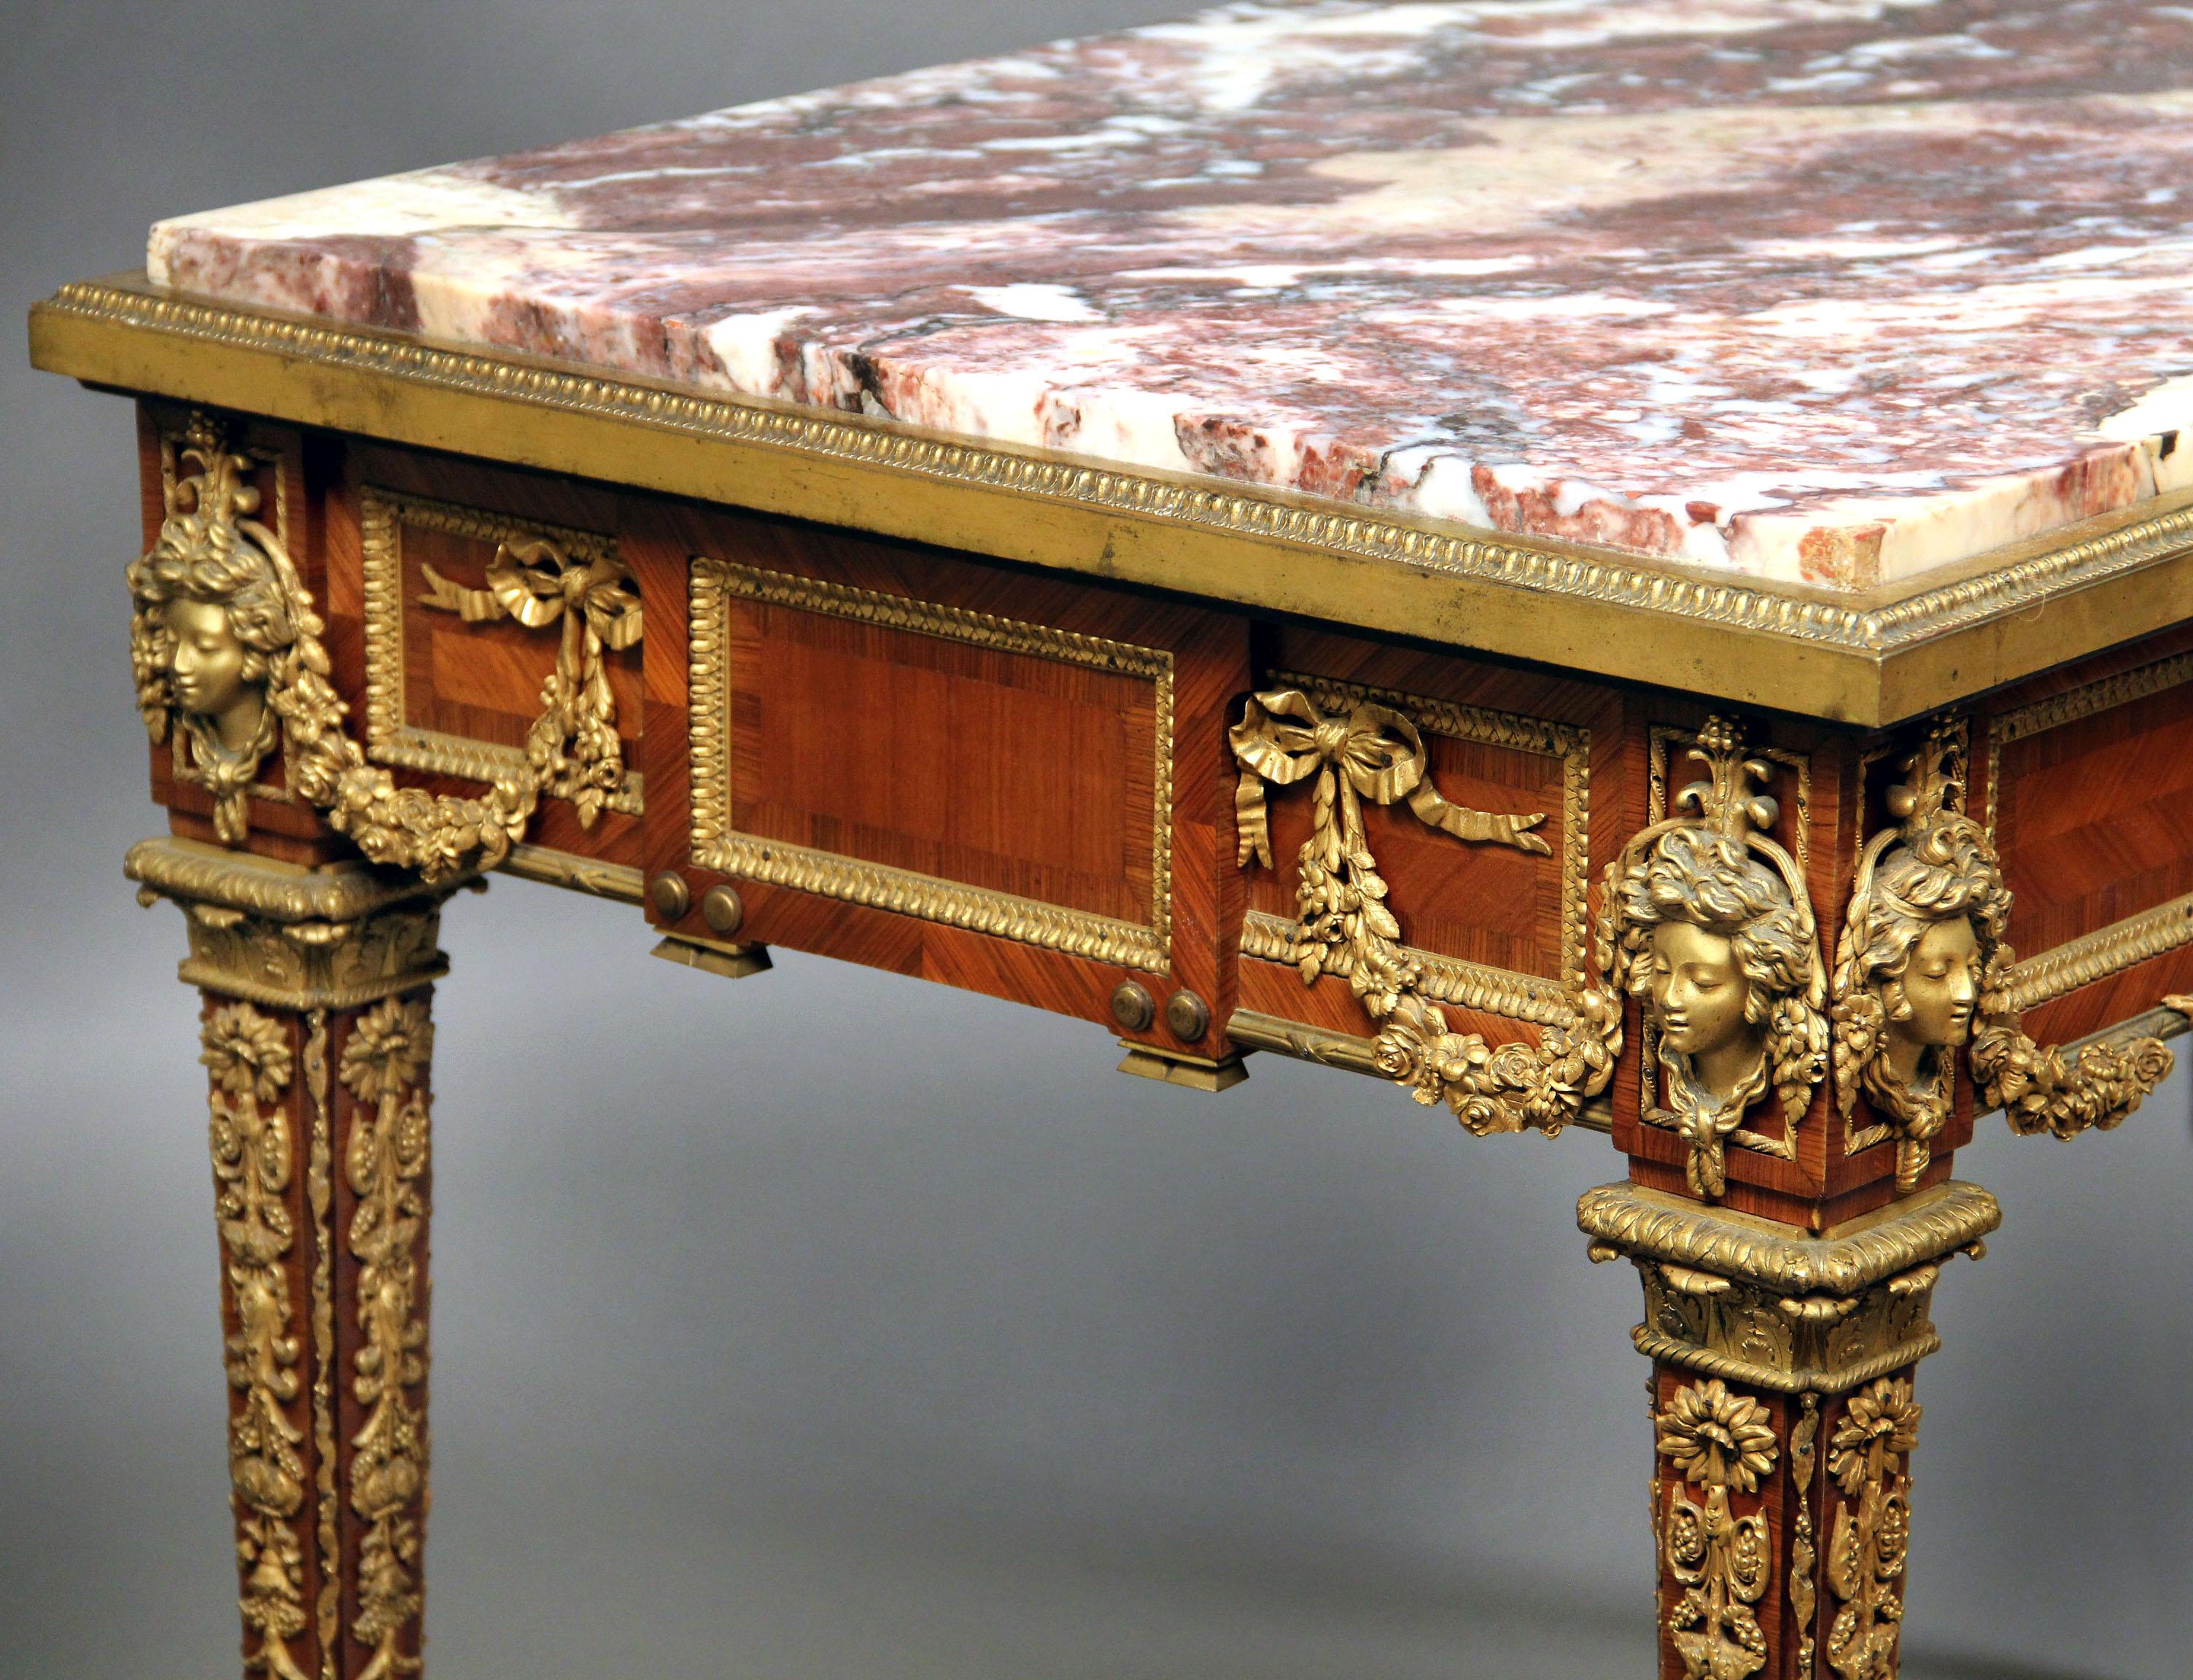 French Fine Late 19th Century Gilt Bronze-Mounted Centre Table by Joseph Zwiener